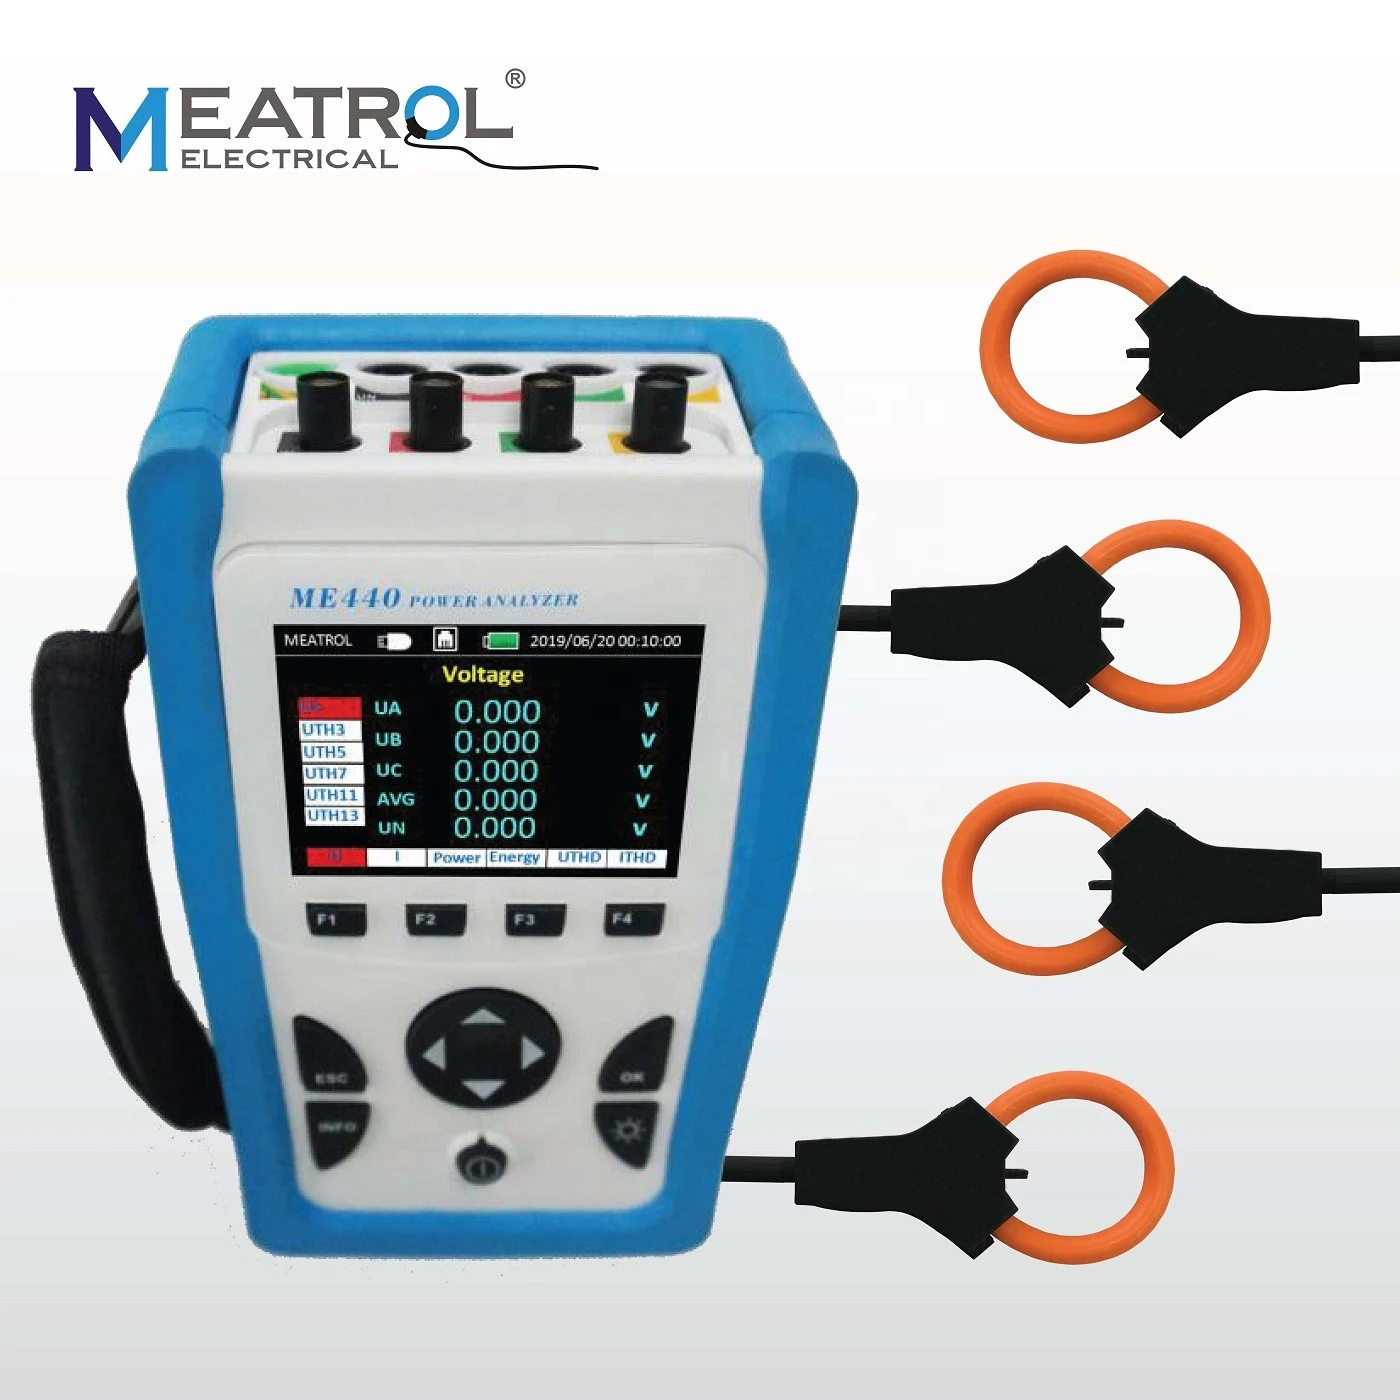 MEATROL ME440 rogowski connected electric meter watt meter kwh meter rogowski coil Clamp Meter